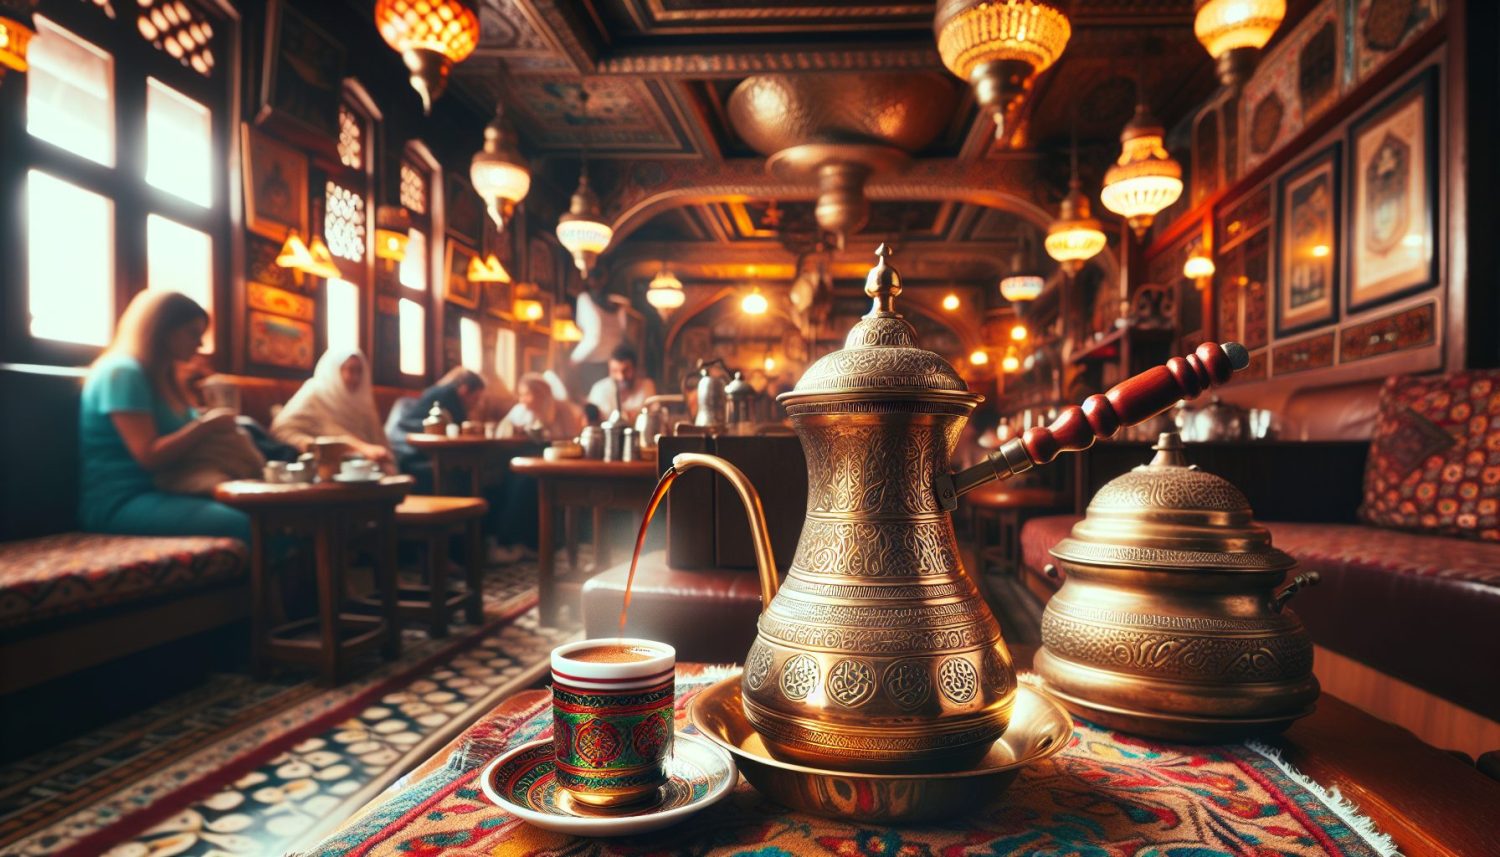 Experience Authentic Turkish Coffee At Home